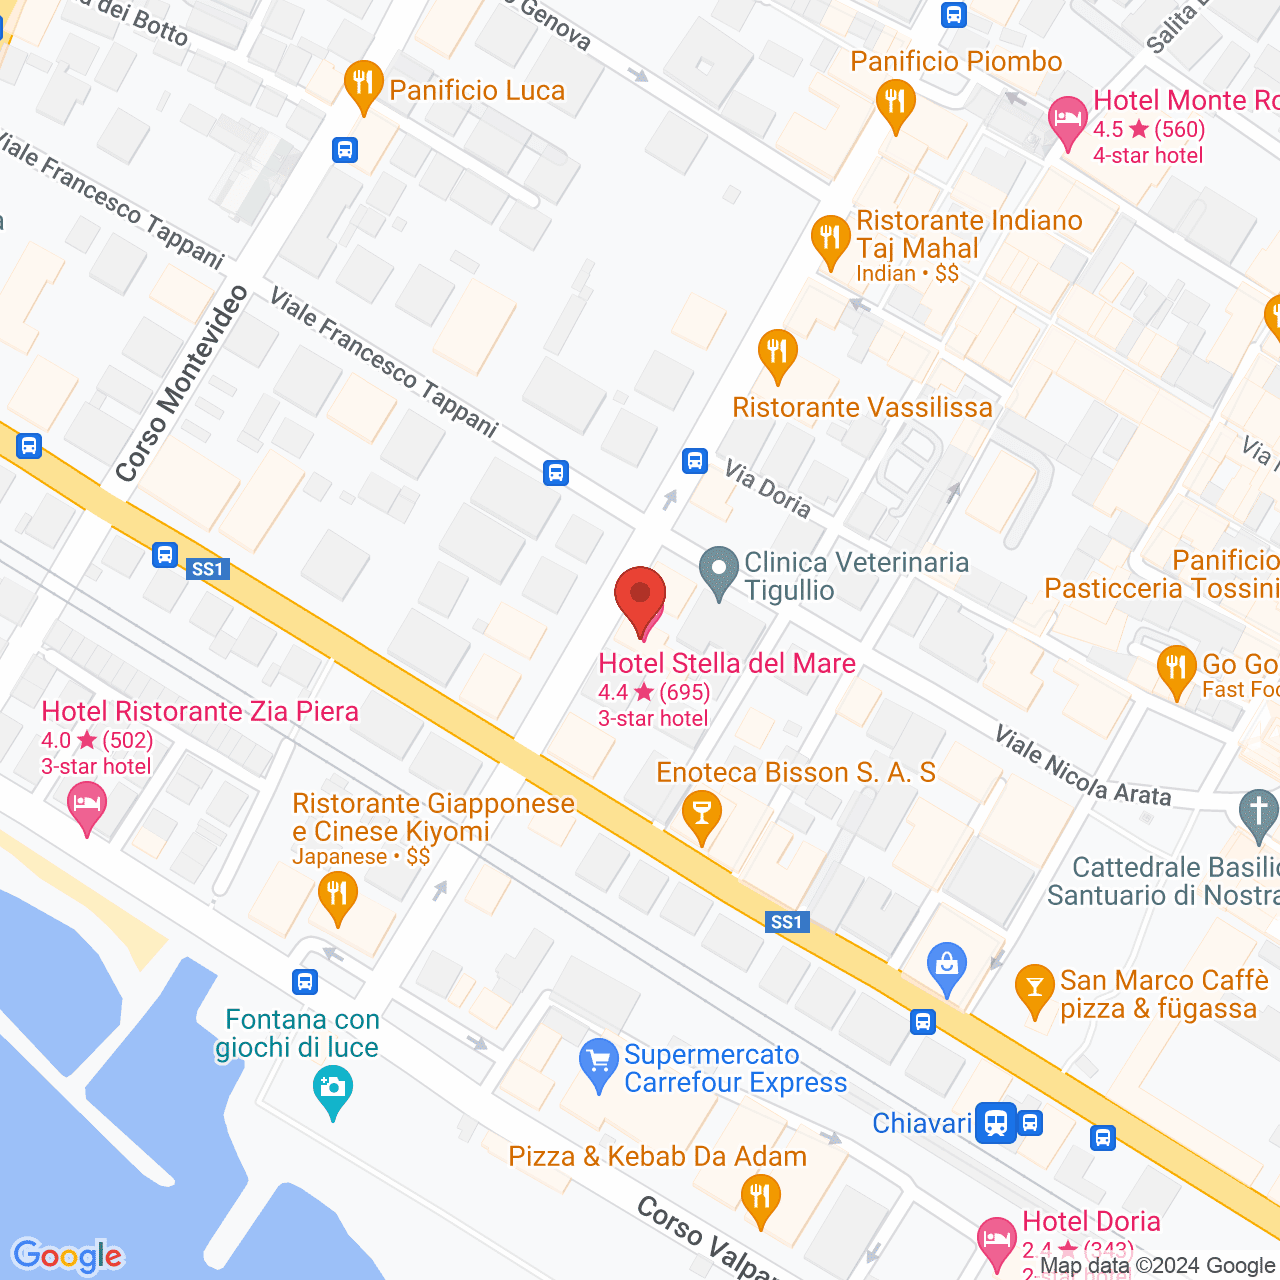 https://maps.googleapis.com/maps/api/staticmap?zoom=10&maptype=hybrid&scale=4&center=44.3171095,9.3206209&markers=color:red%7C%7C44.3171095,9.3206209&size=1000x1000&key=AIzaSyAQg6Liu52-a7wn17F9B-5c4QmJ9kTO3Mo